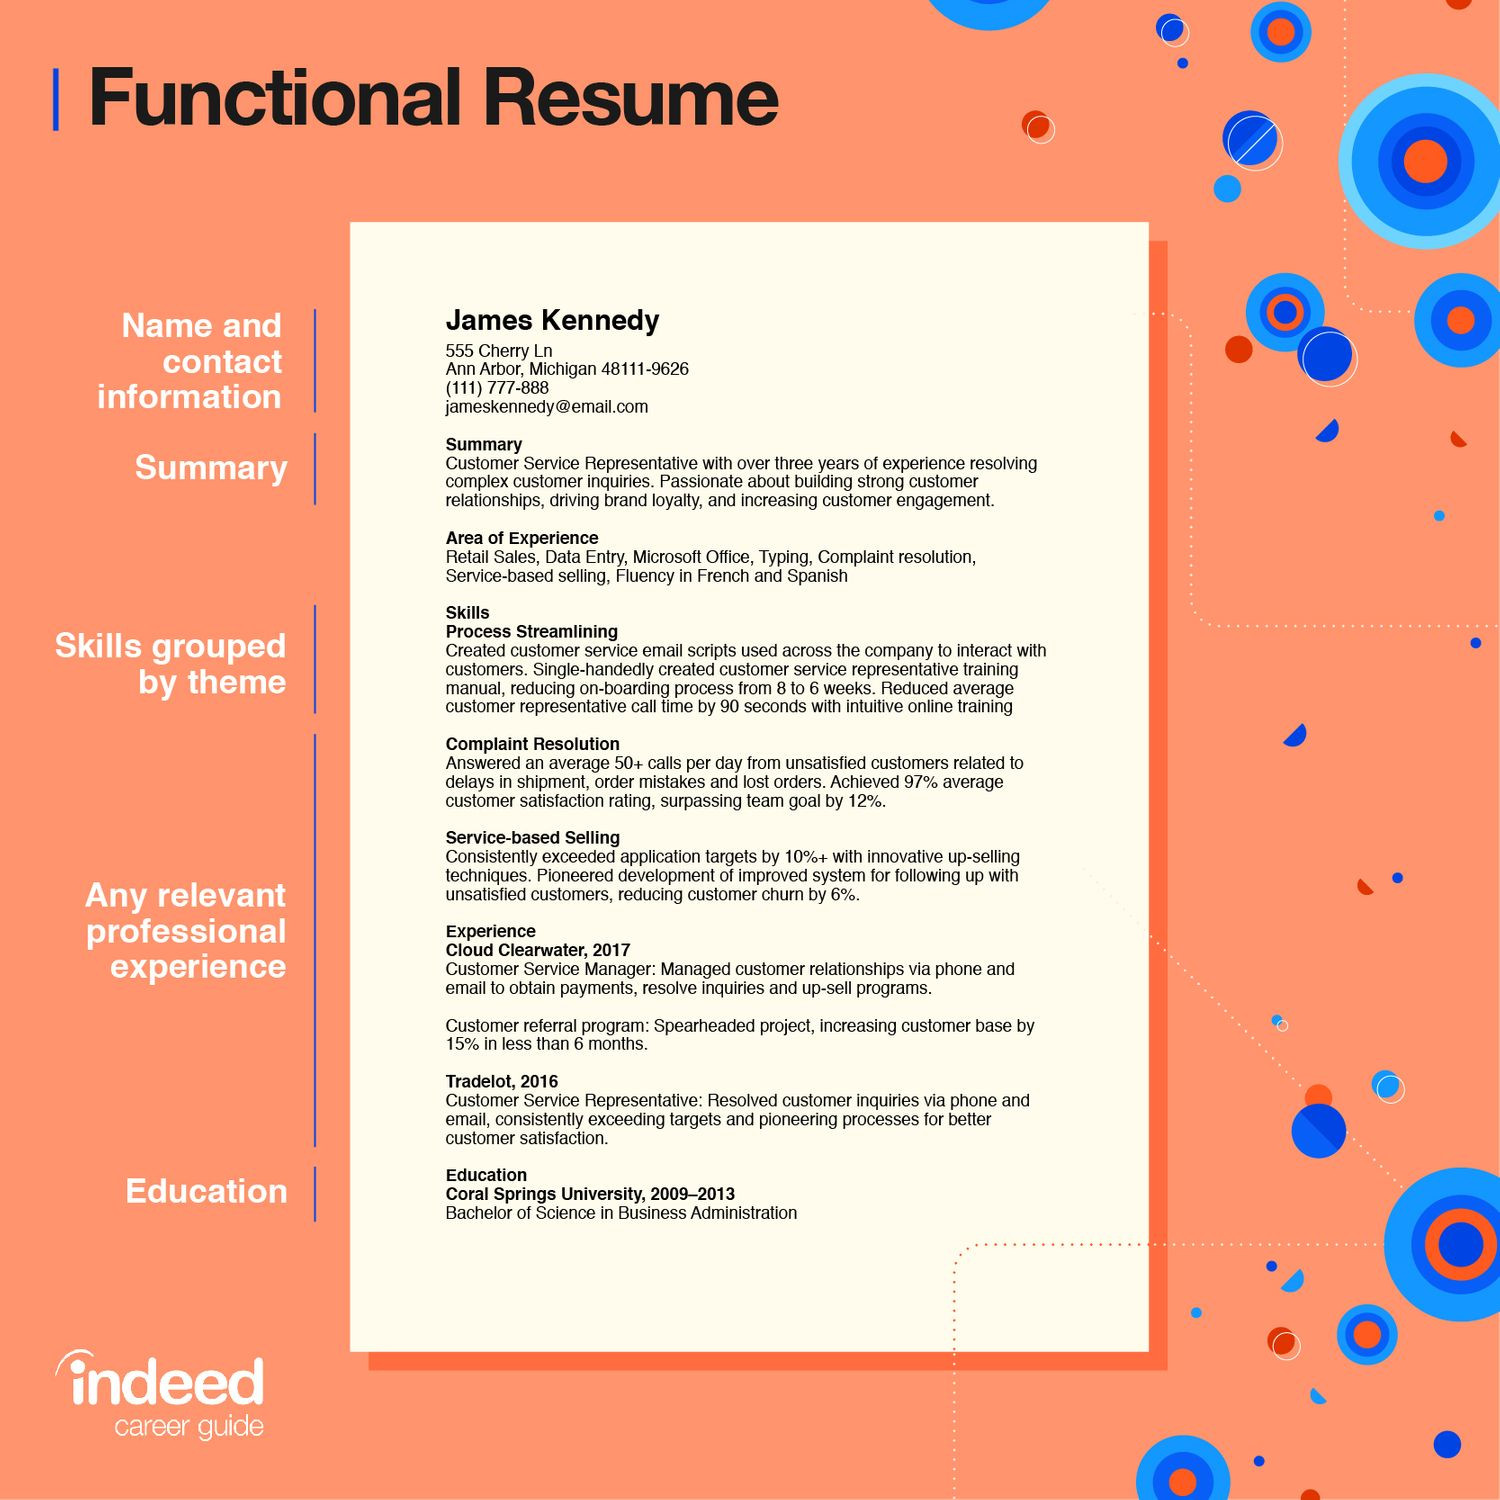 Resume Samples that Emphasize Work Skills top Resume formats: Tips and Examples Of 3 Common Resumes Indeed.com